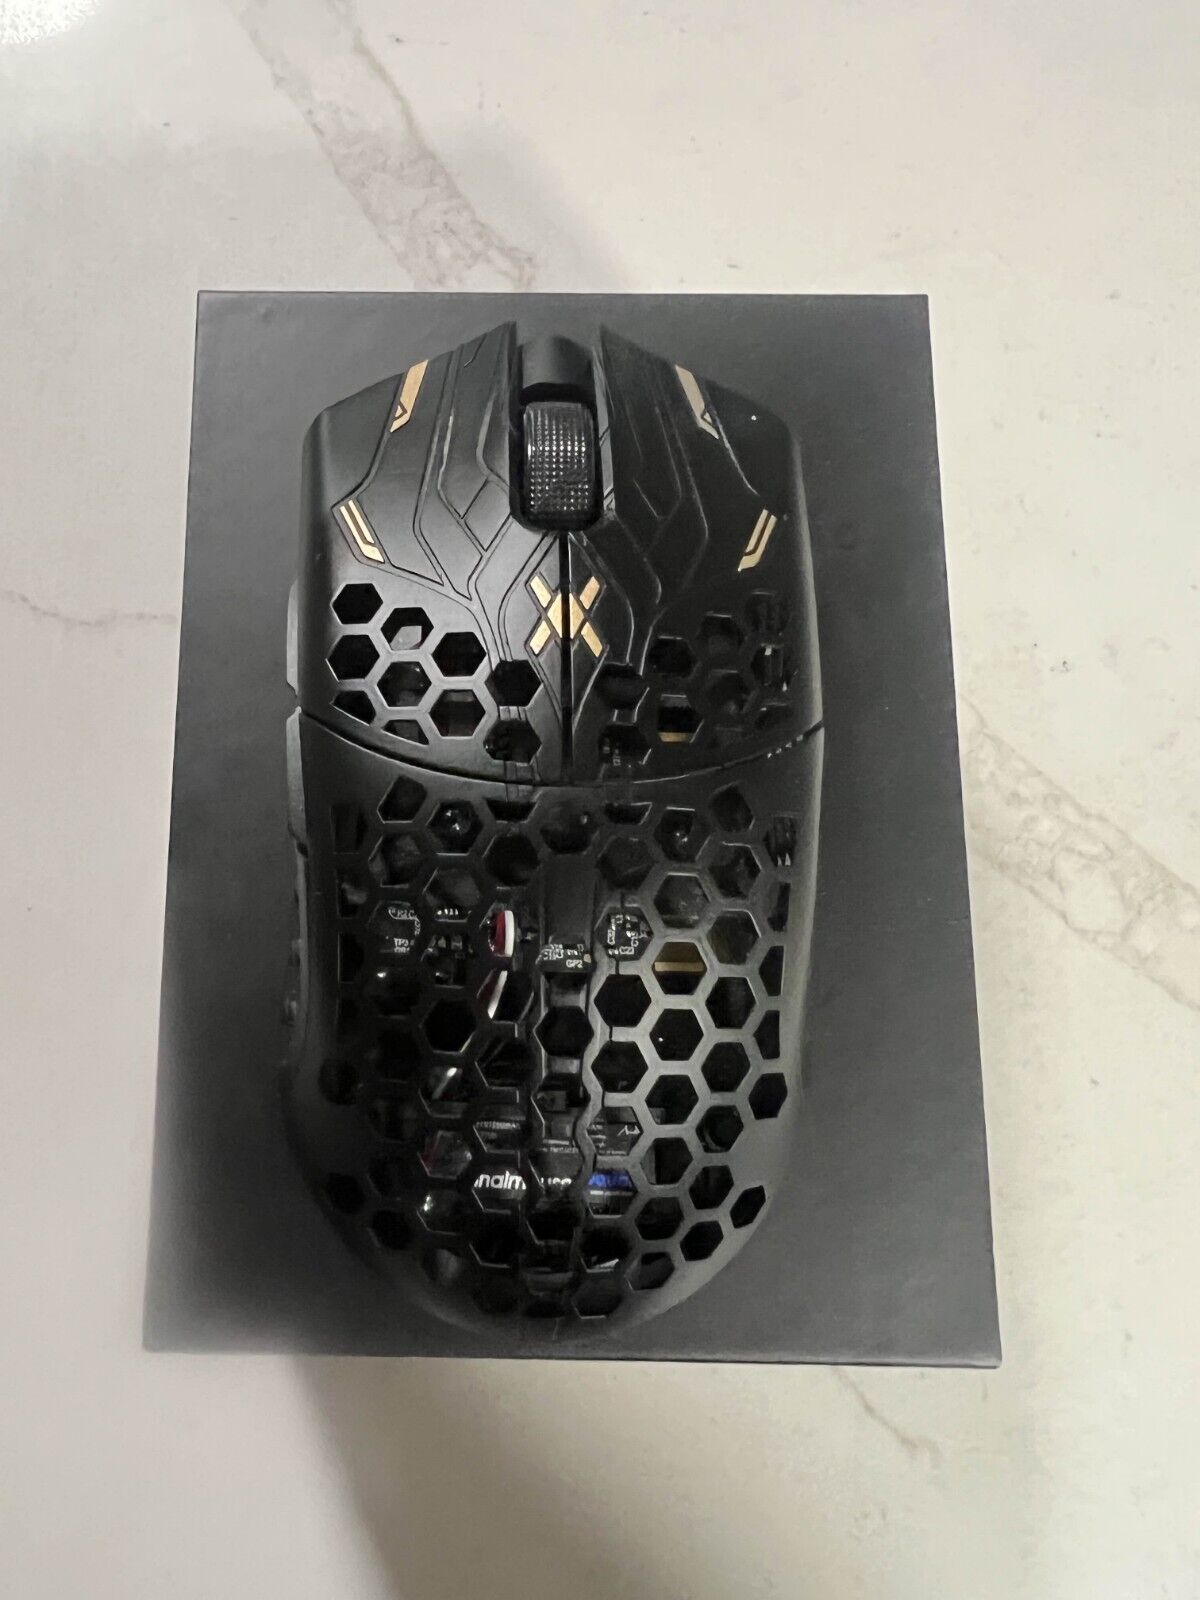 Finalmouse ULX Pro Series - TIGER (Large)